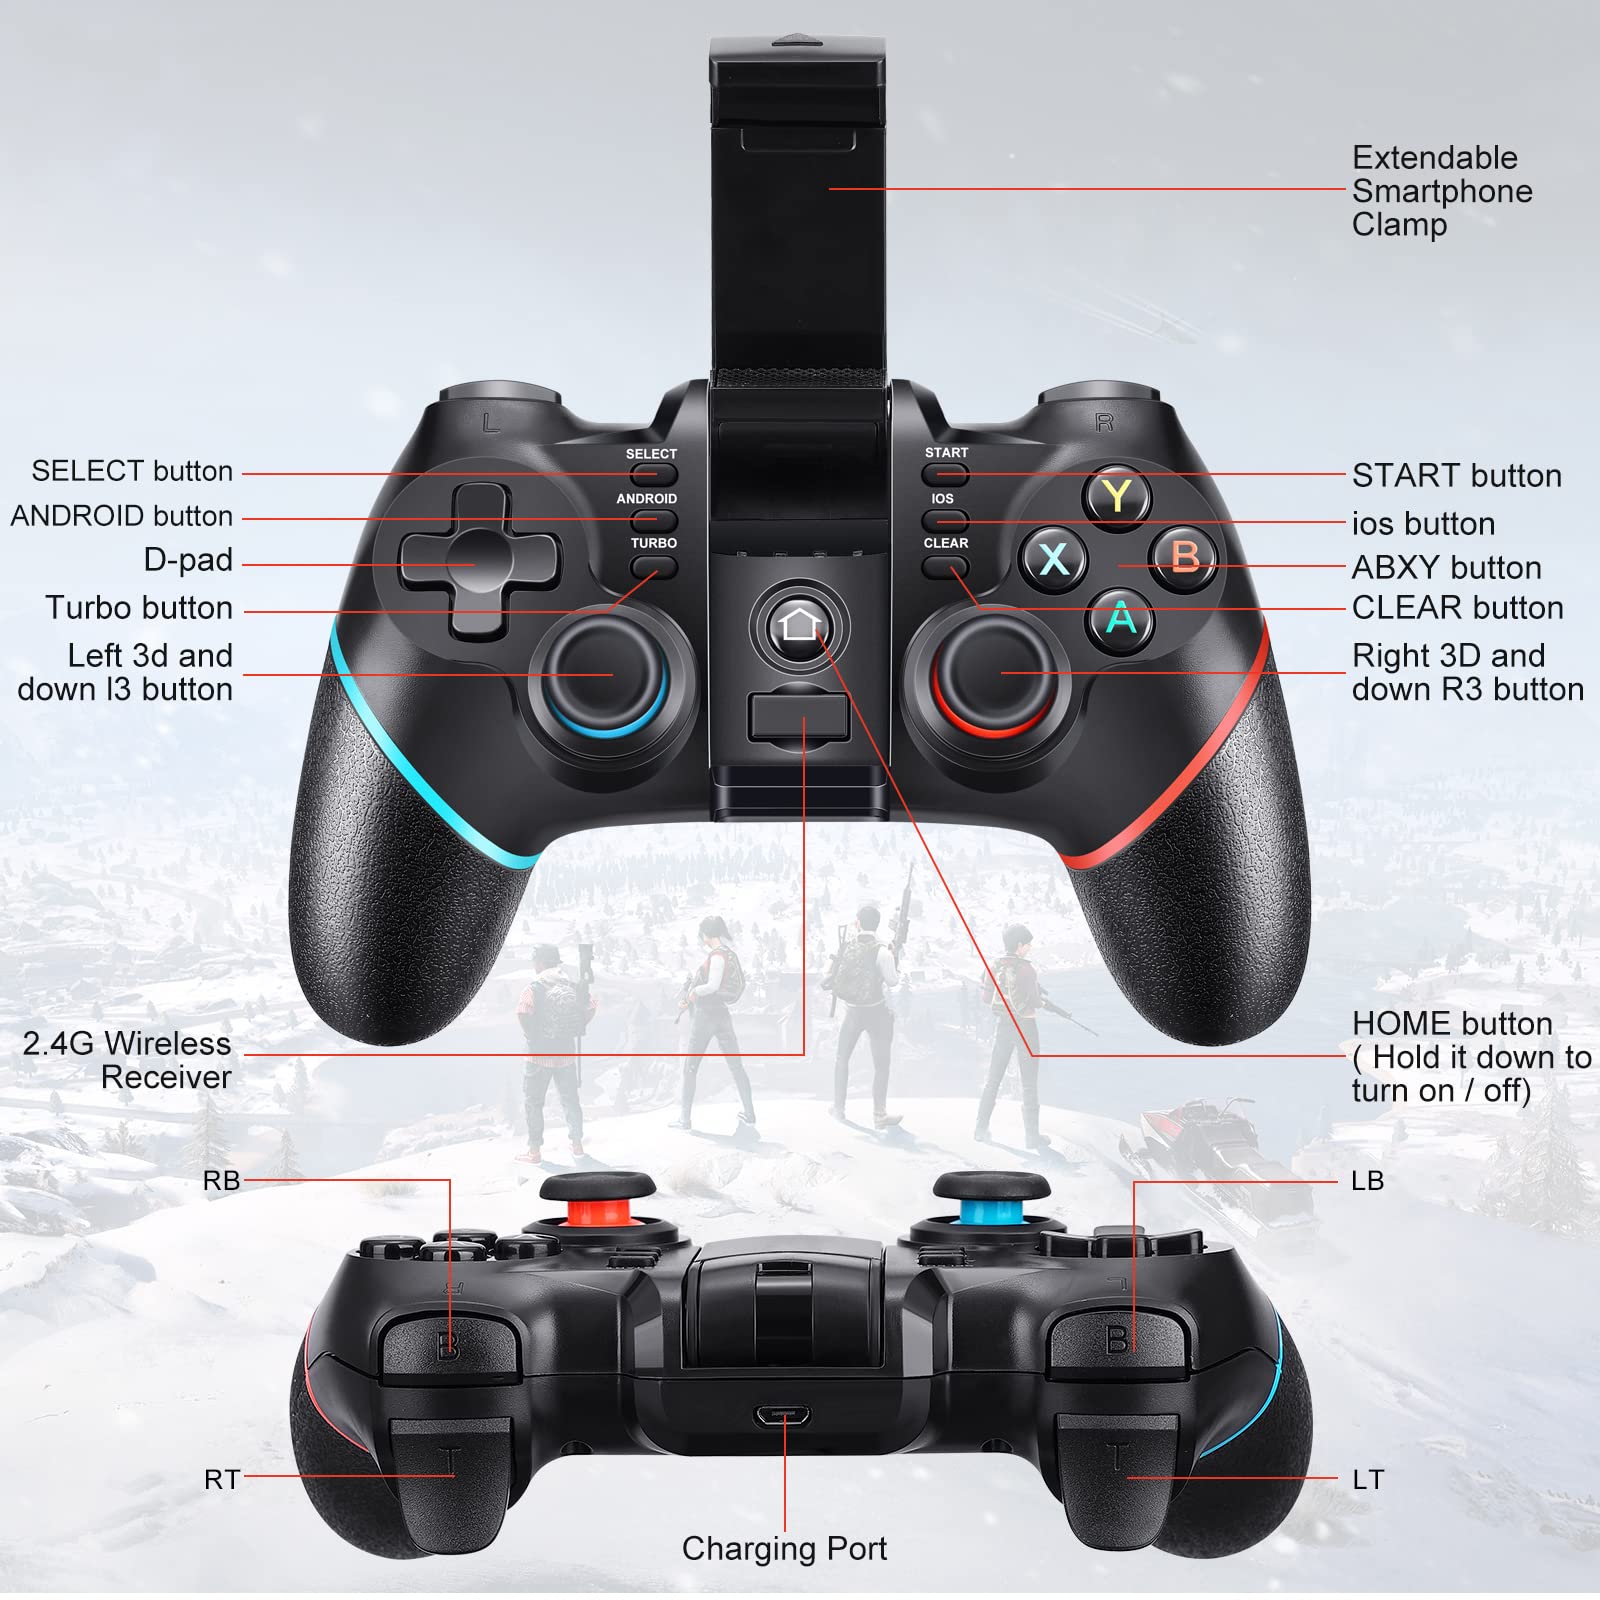 Vbepos Mobile Gaming Controller, Upgrade Bluetooth & 2.4G Wireless Controller for iPhone Android/PC Windows/Smart TV/ PS3/ PS4